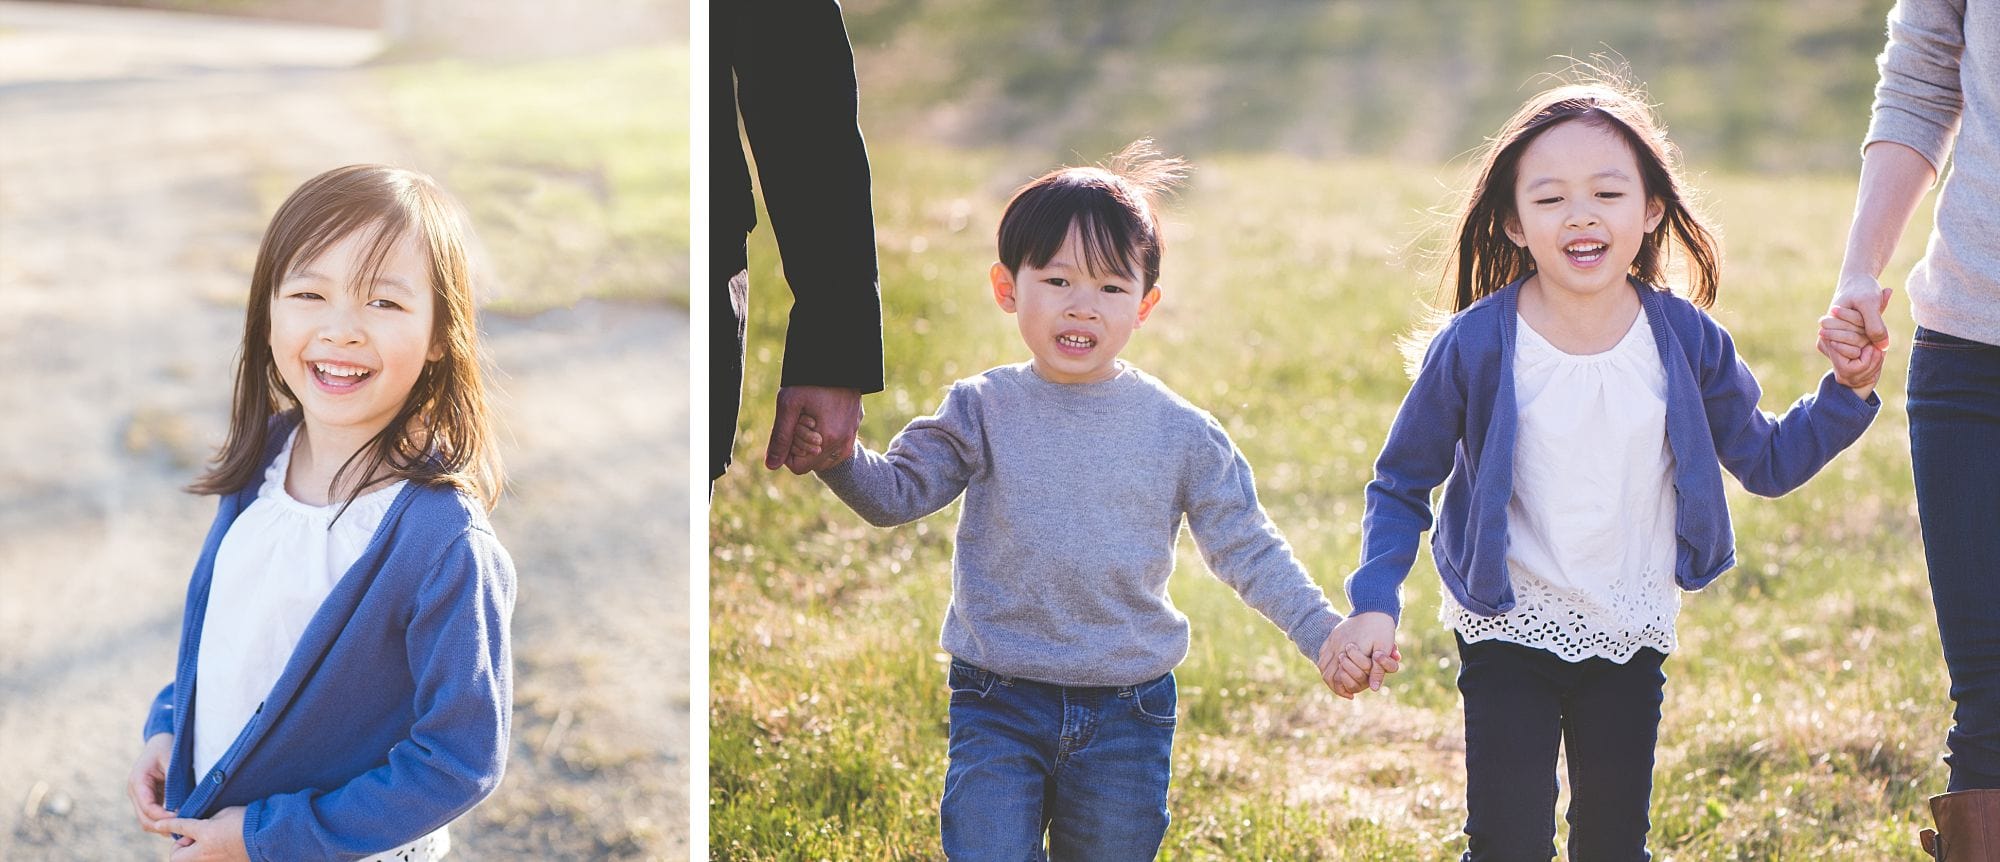 Outdoor photo of 2 kids holding hands with parents in a field